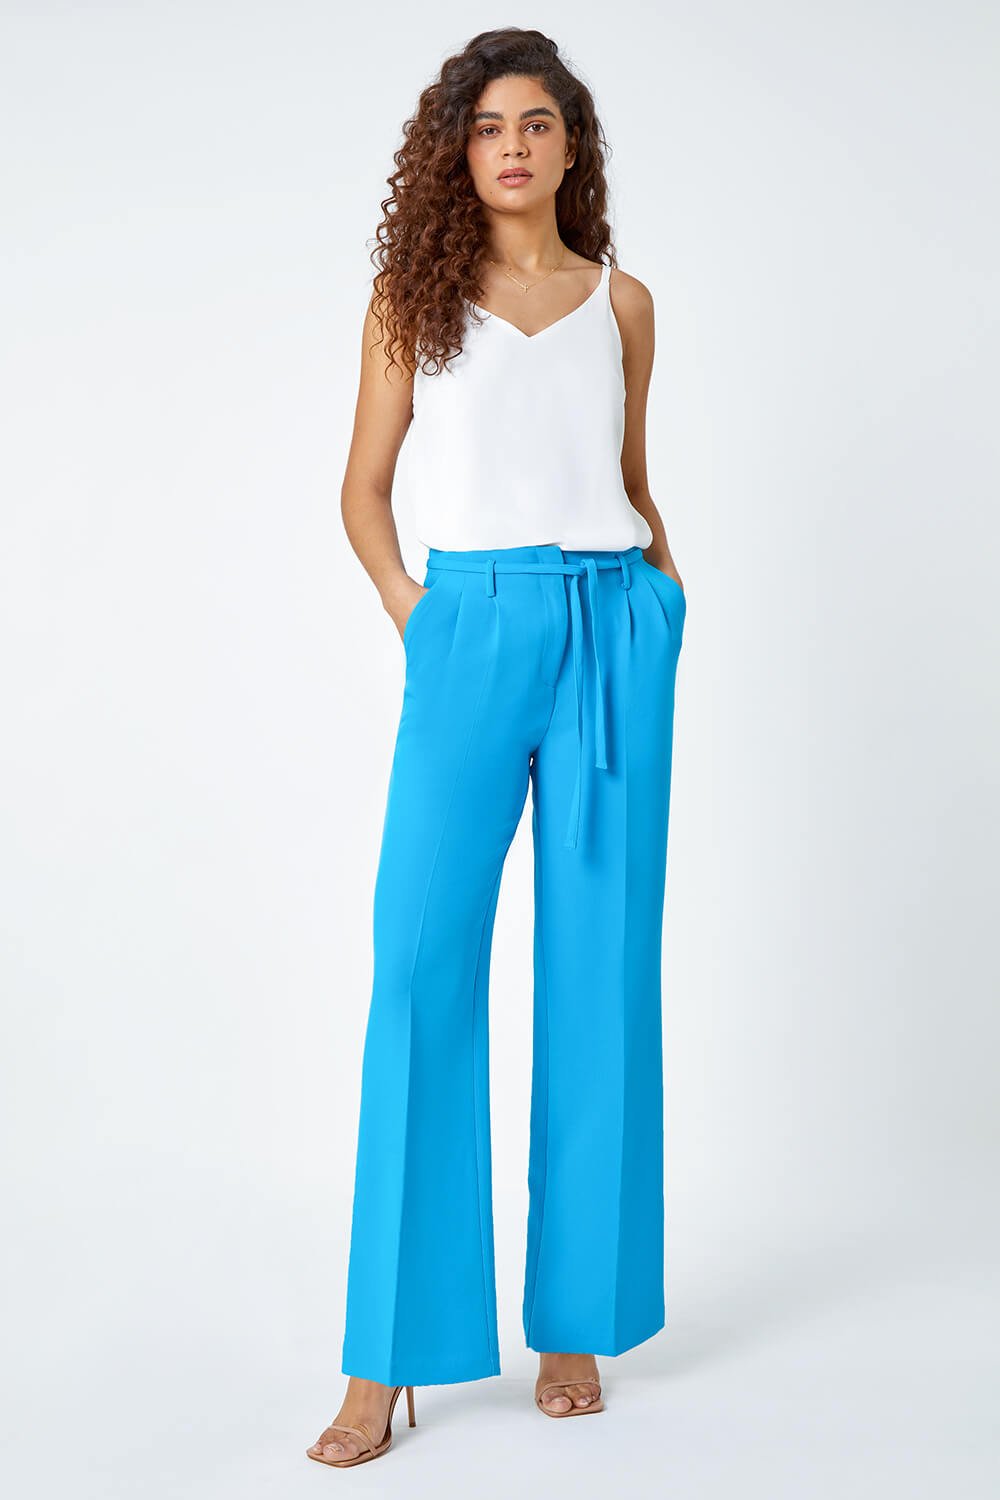 Turquoise Crepe Stretch Straight Leg Trousers, Image 2 of 5